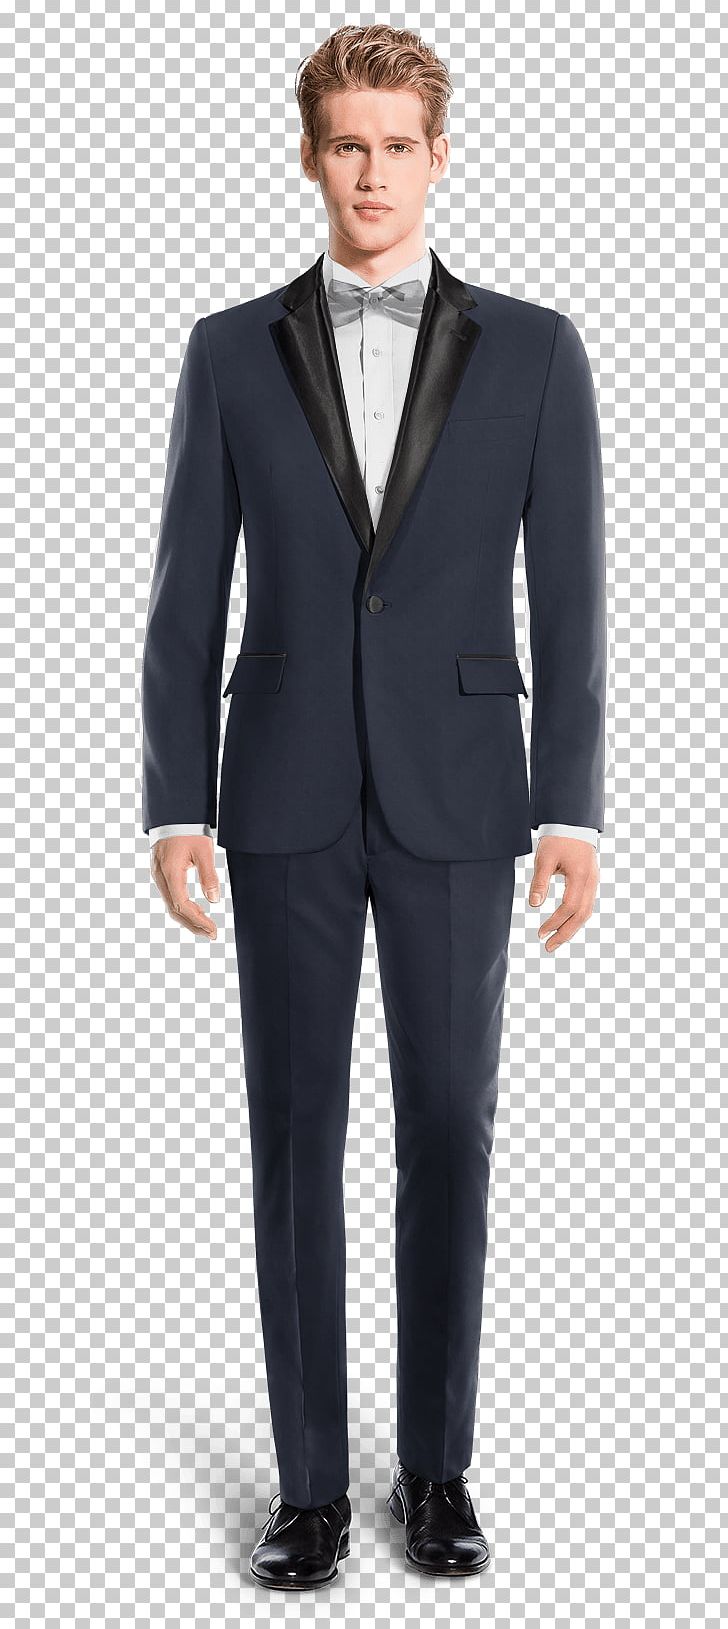 Suit Lapel Tuxedo Double-breasted Single-breasted PNG, Clipart, Blazer, Business, Businessperson, Button, Clothing Free PNG Download